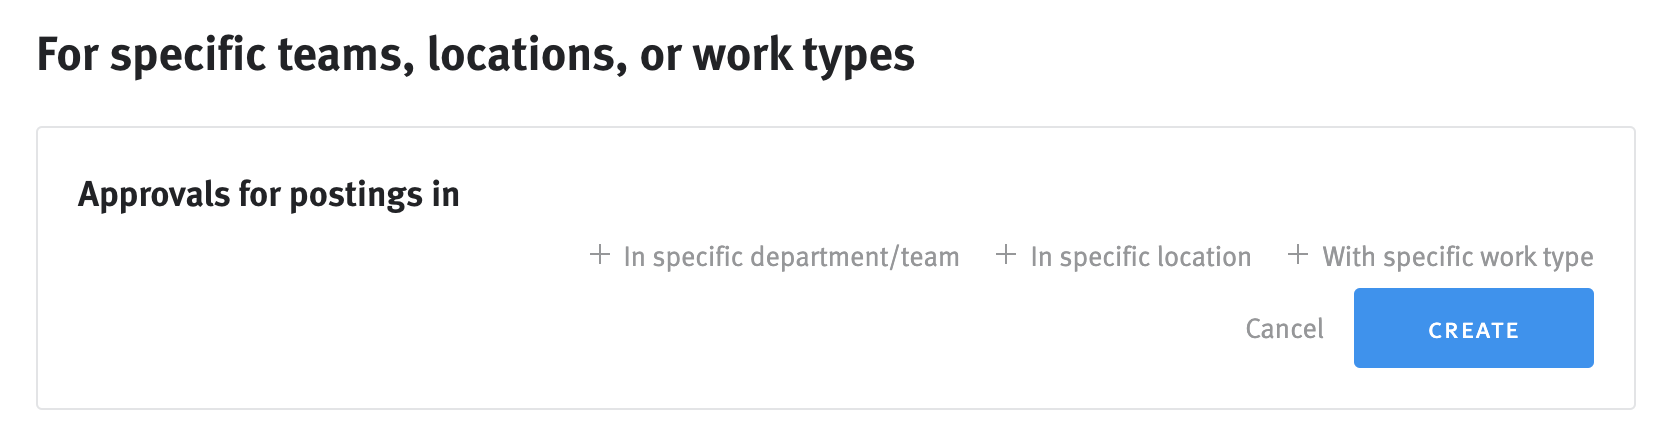 Posting approval workflow editor for specific teams, locations, or work types.